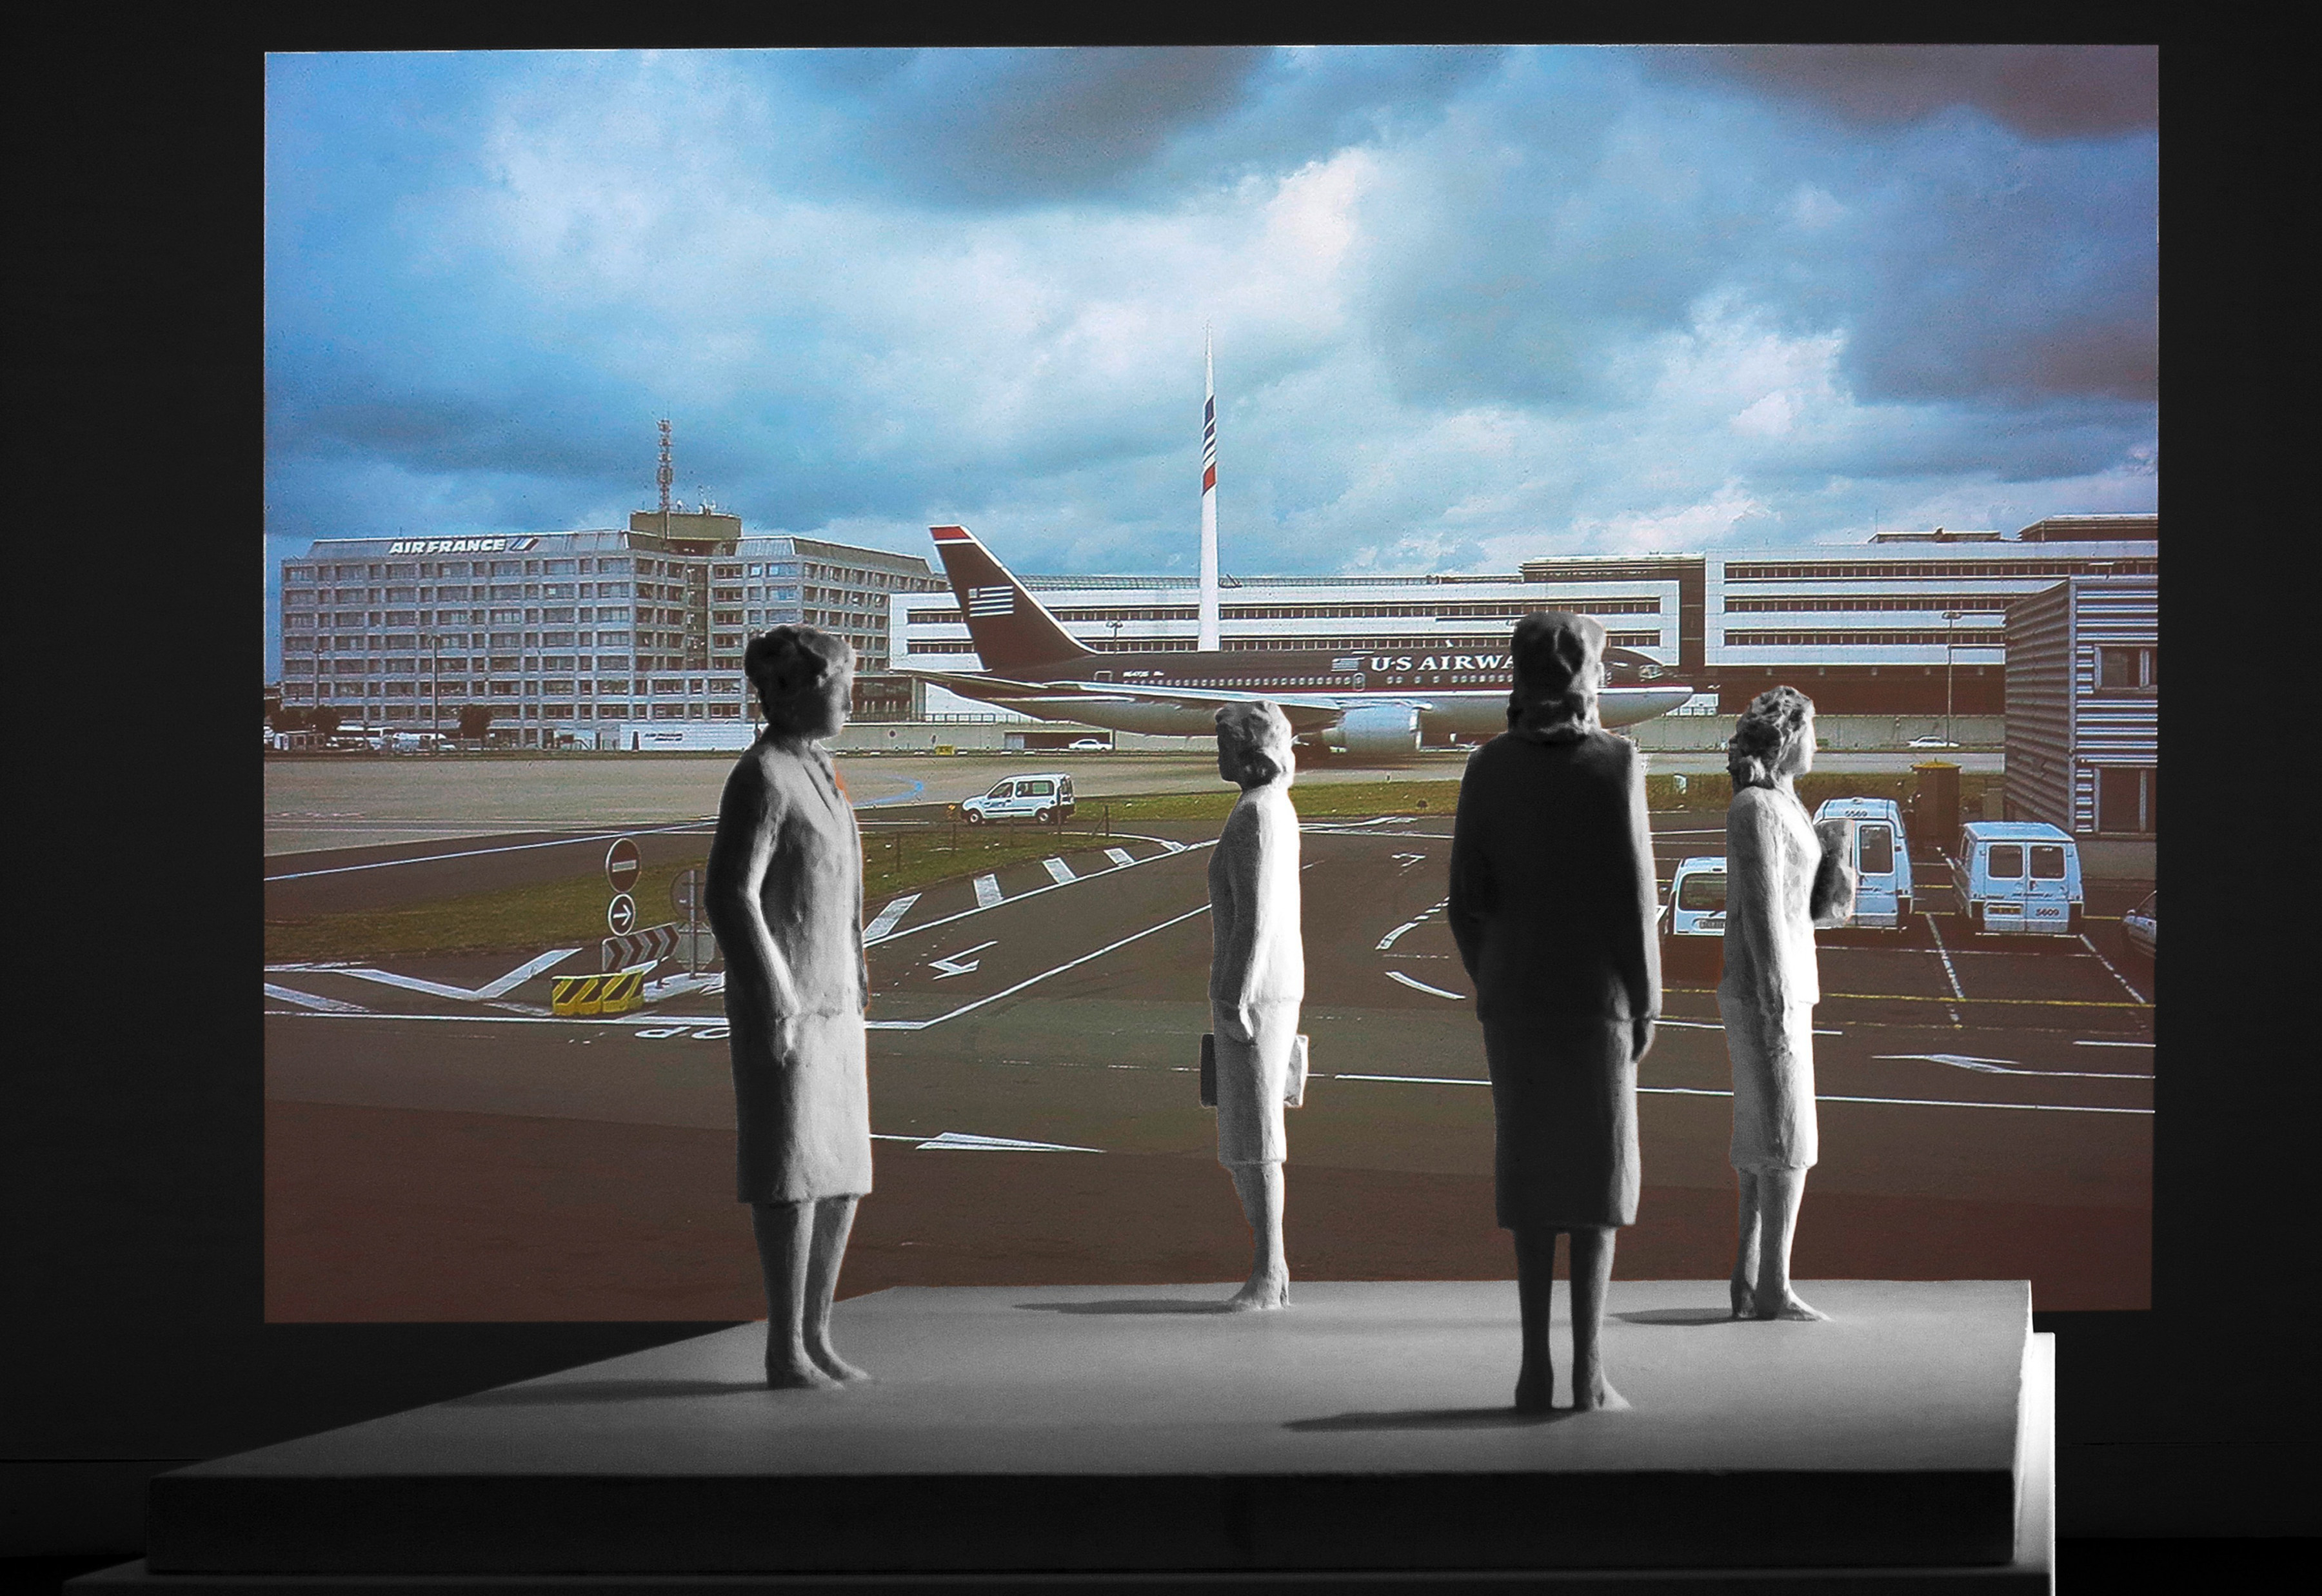 PETER FISCHLI / DAVID WEISS
Views of Airports
1987-2012
Digital projection of 469 color images, silent
Ed. 4/6 + 1 AP 1:46:43 h
Dimensions variable
FISCW38611